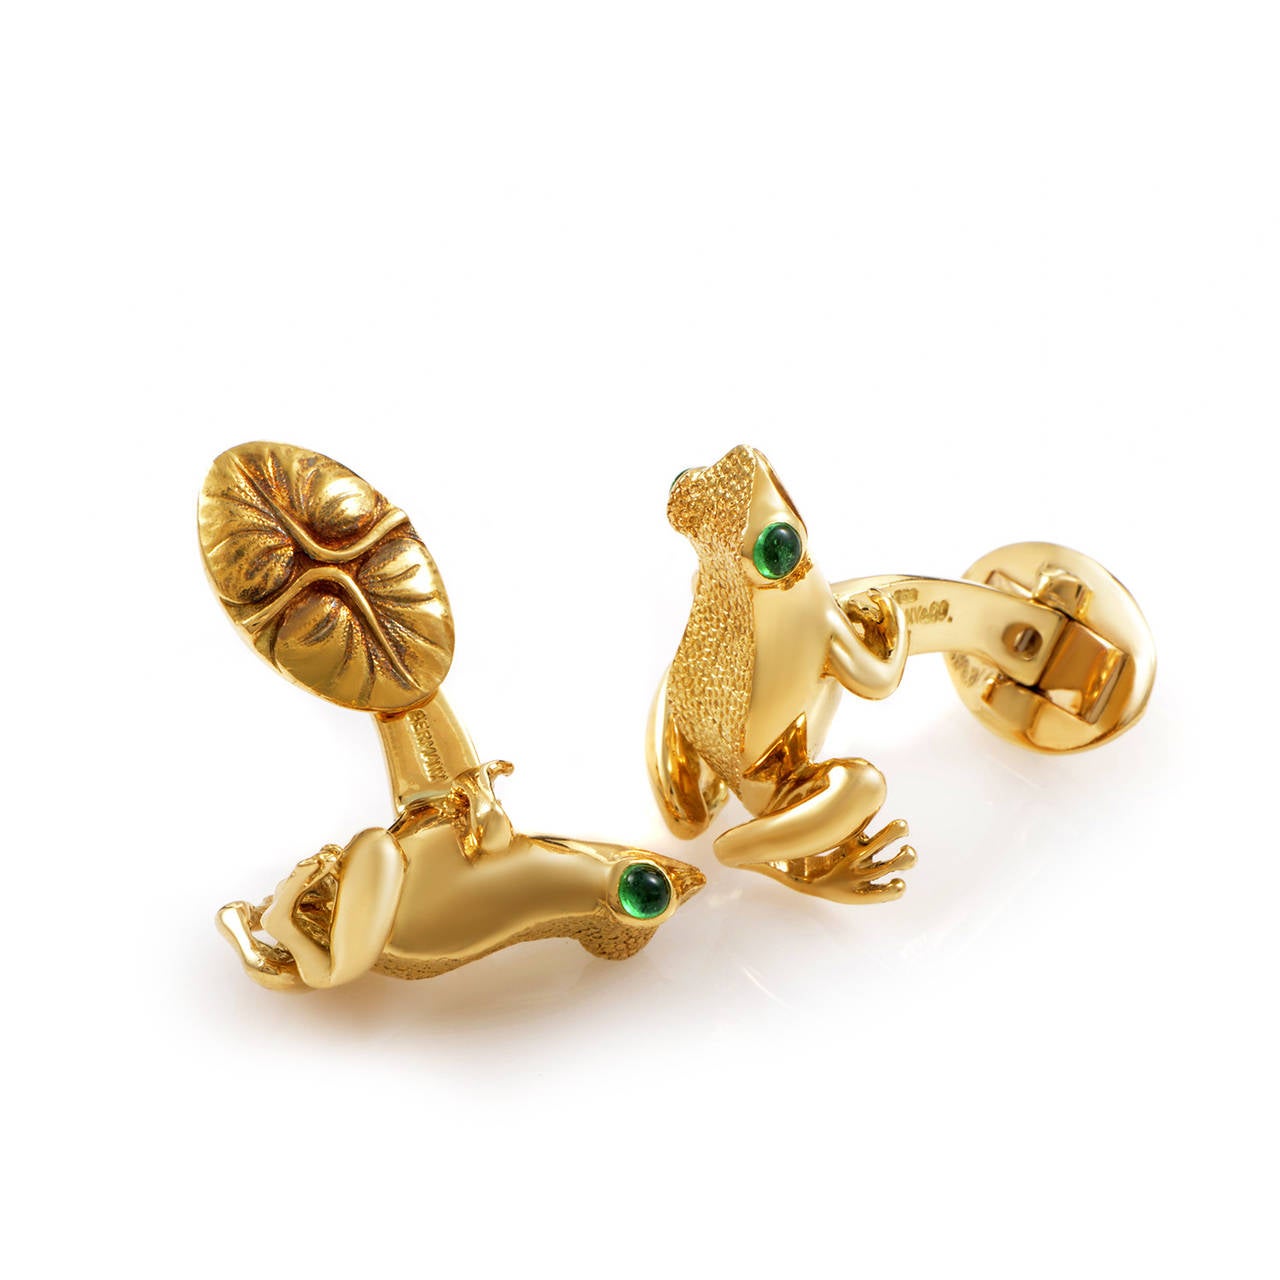 This pair of cufflinks from Tiffany & Co. have a playful design that s perfect for a man or a woman. The cufflinks are made of 18K yellow gold and depict frogs with bright green emerald eyes.